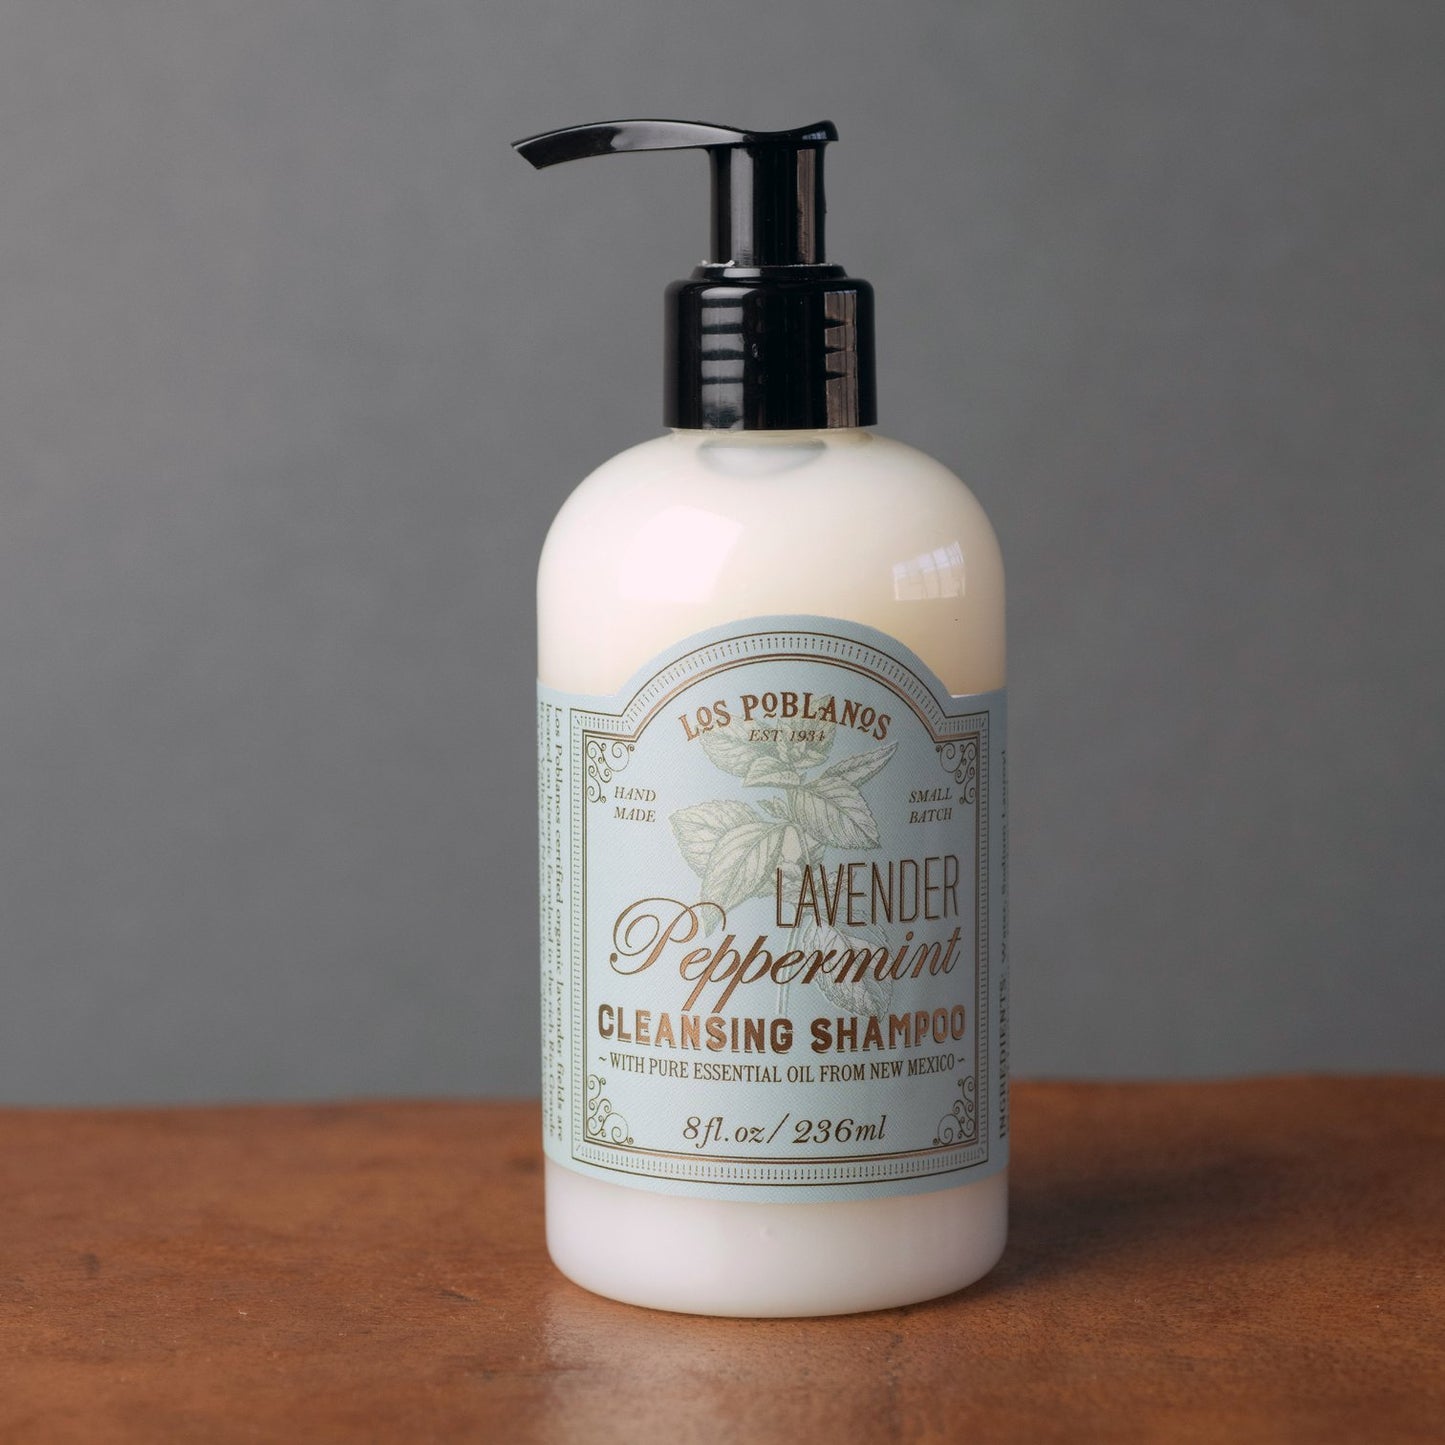 Lavender Peppermint Cleansing Shampoo & Conditioning Crème